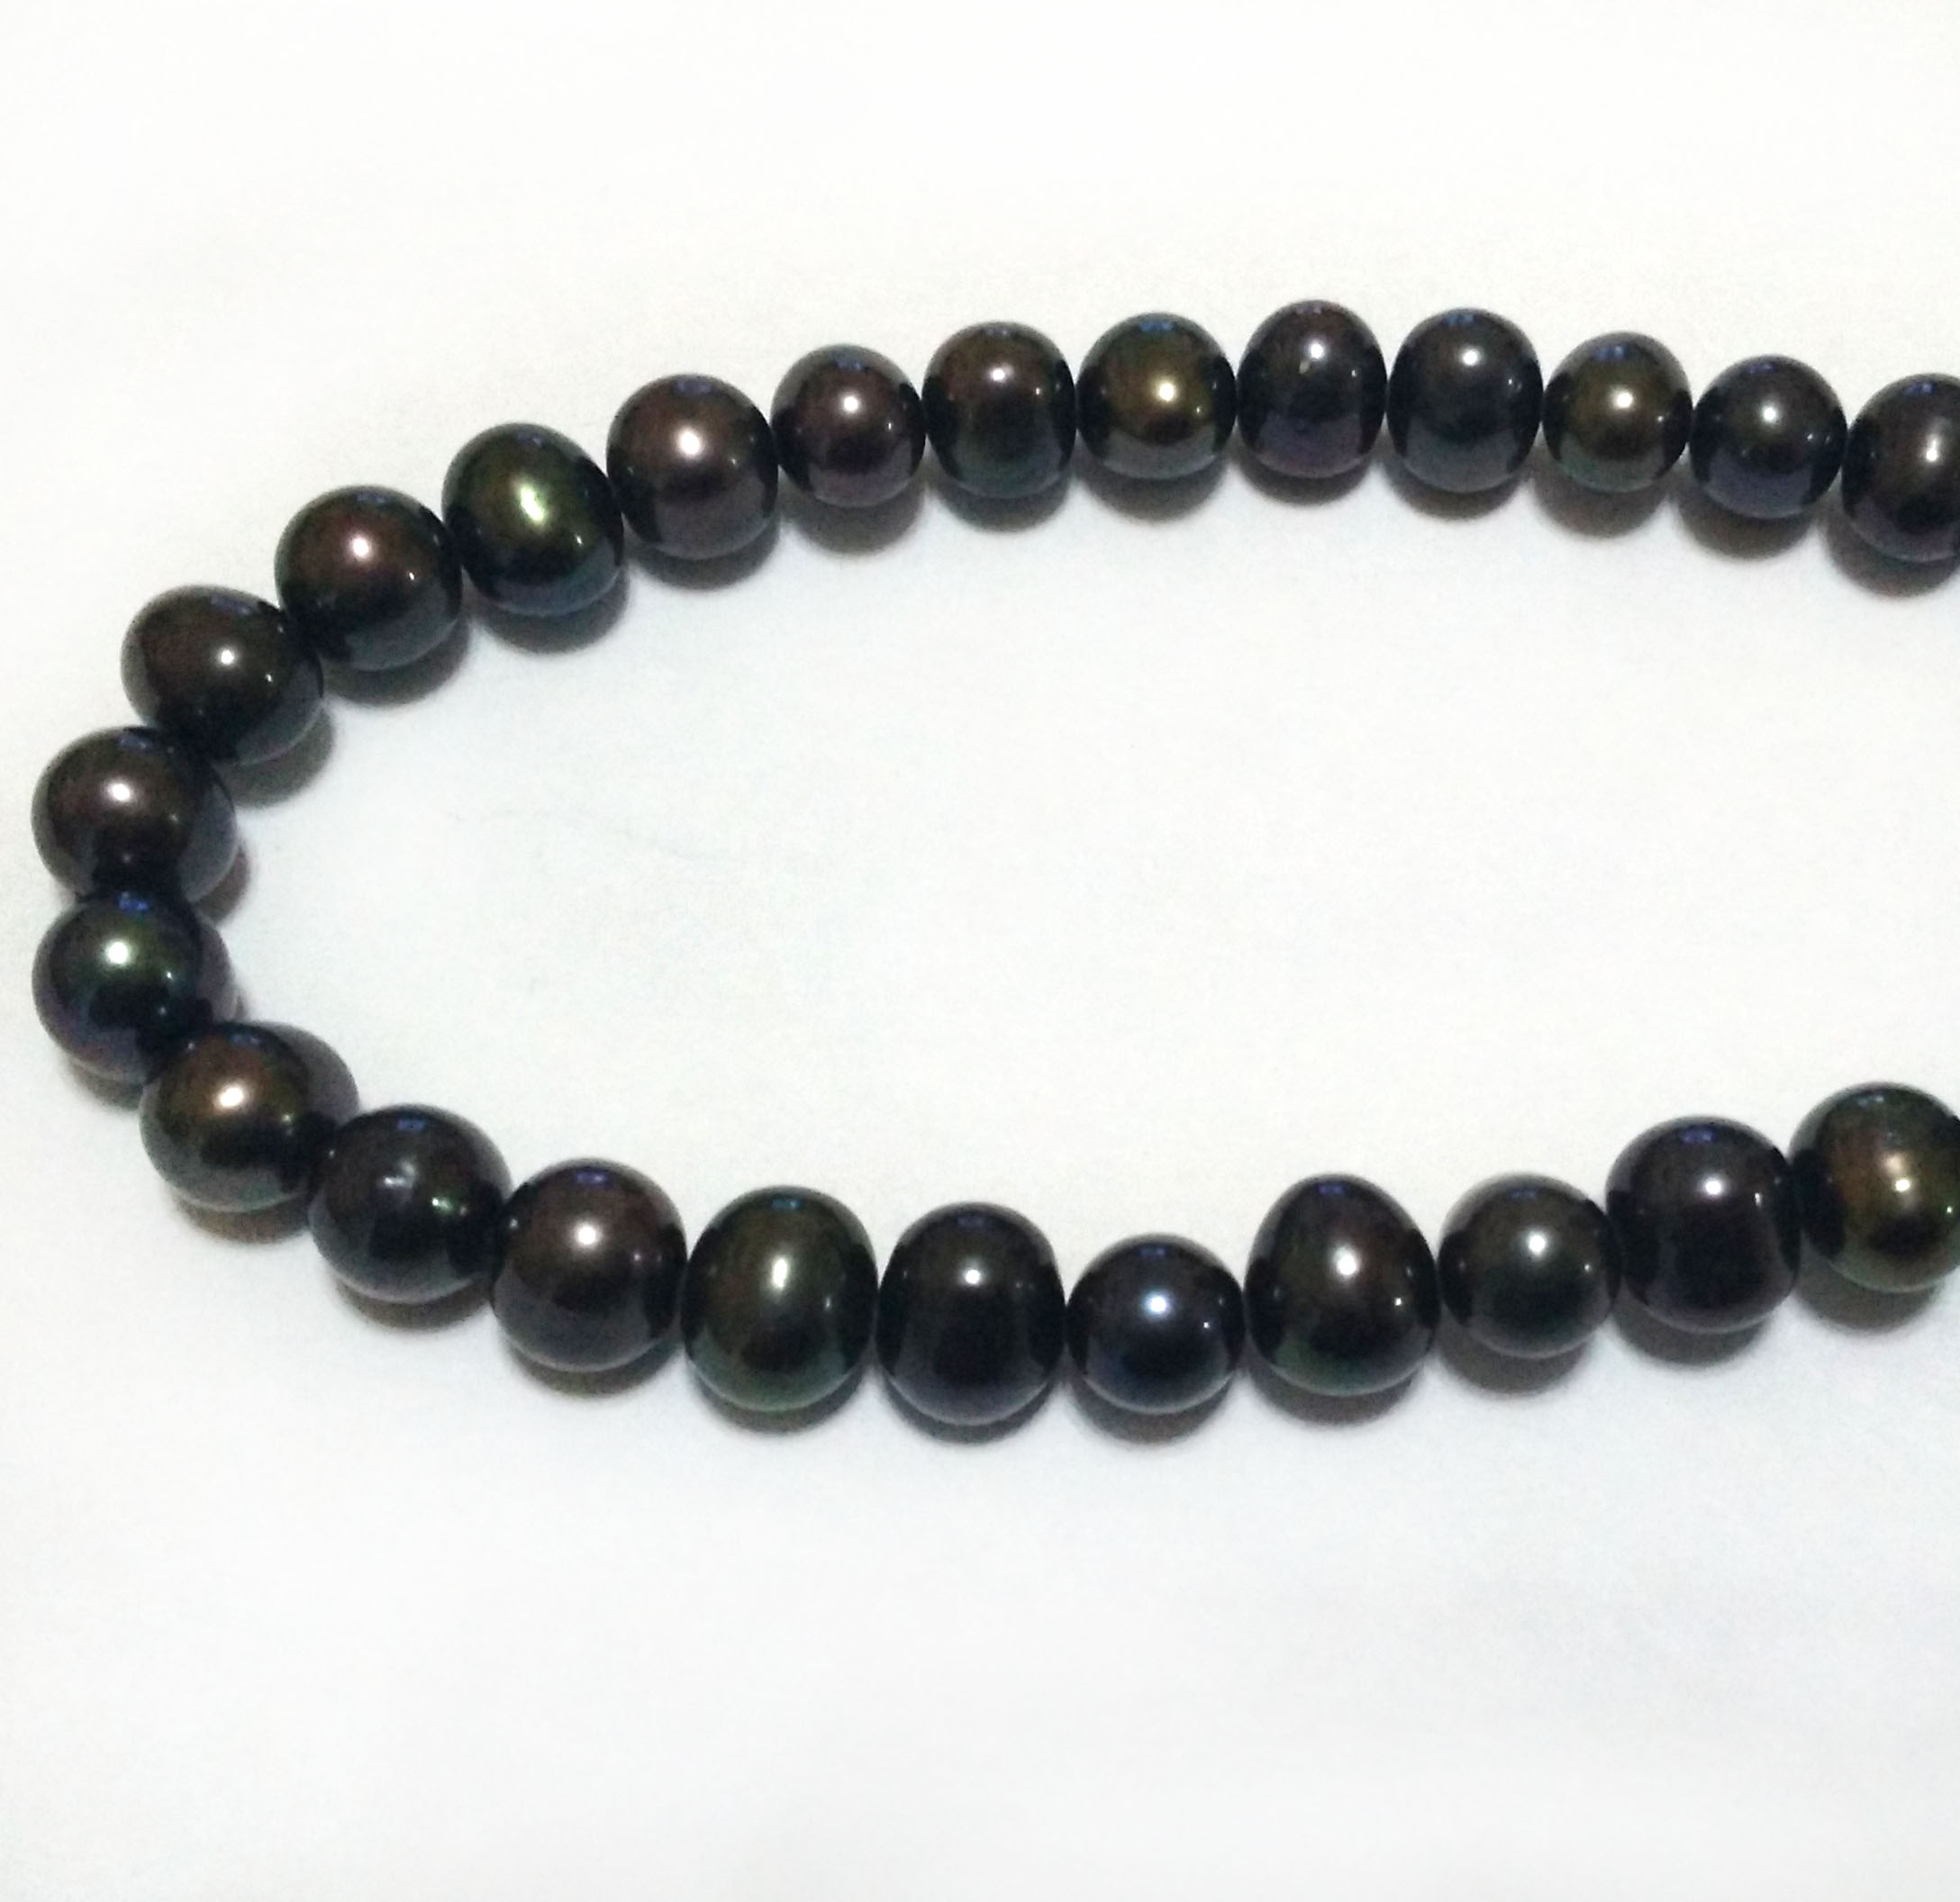 16 inches 8-9mm A+ Black Potato Shaped Pearls Loose Strand